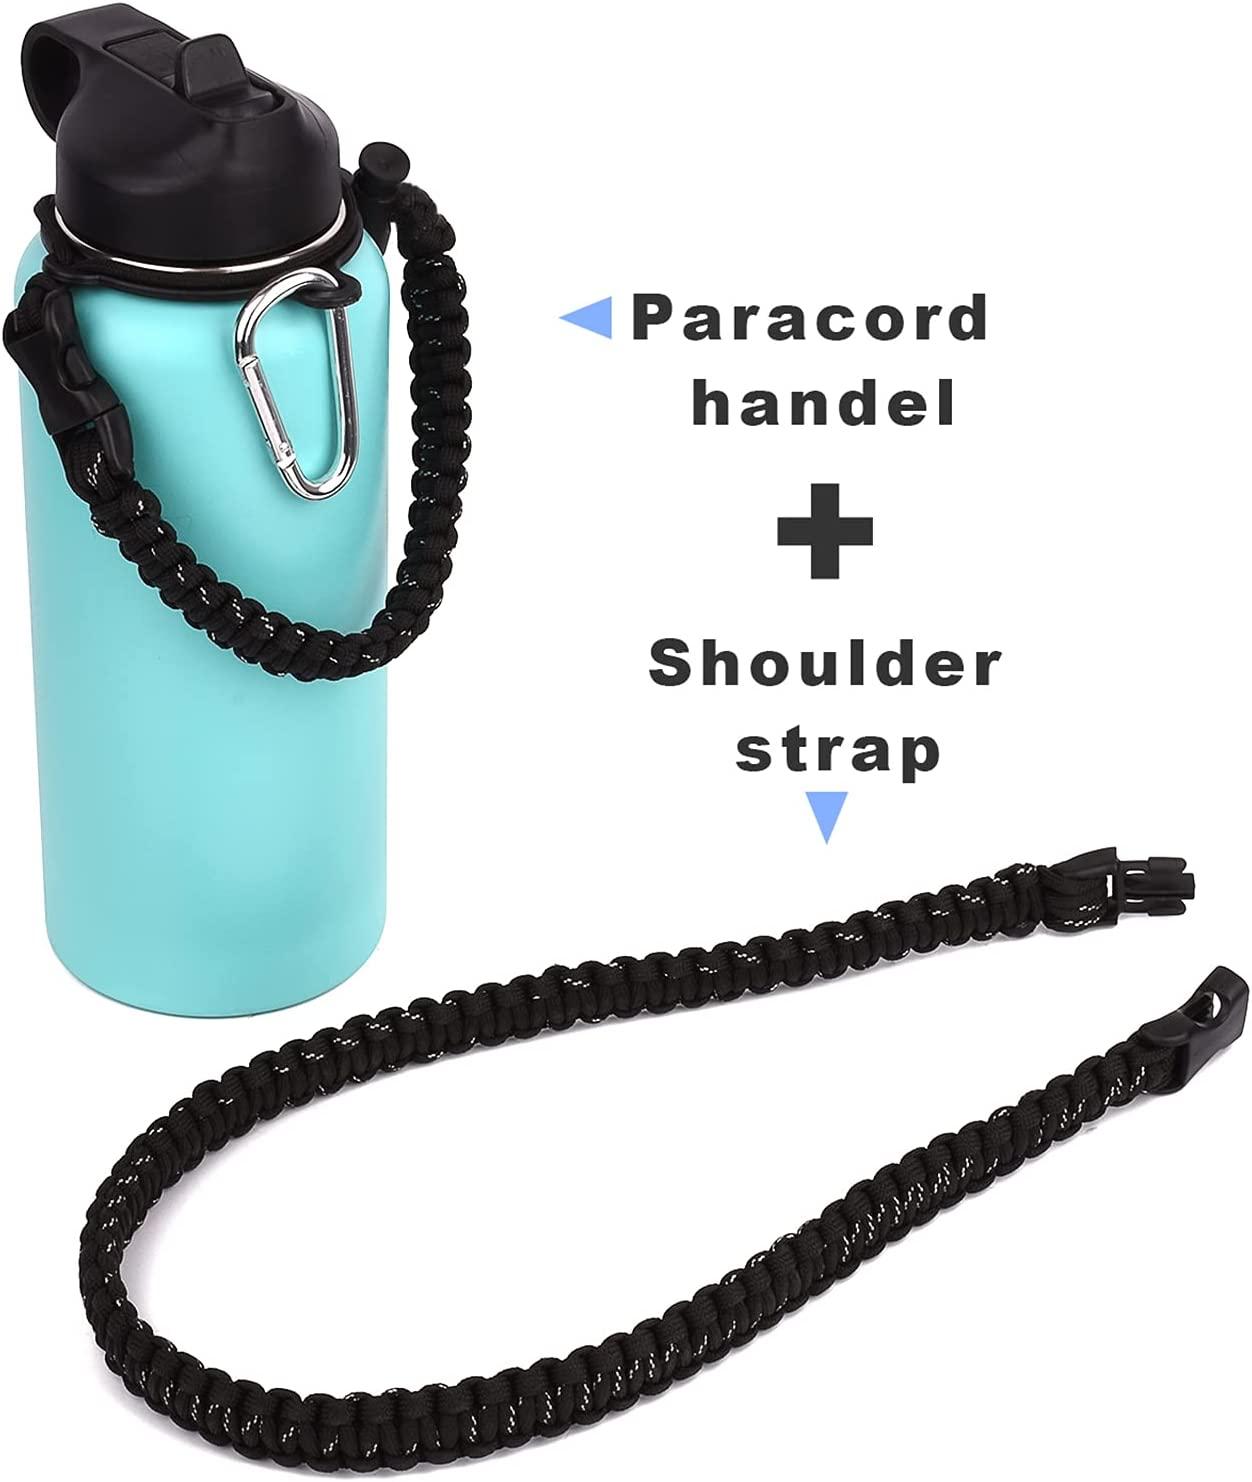  iLVANYA Paracord Handle with Shoulder Strap for Hydro Flask,  Paracord Strap Carrier for 12oz to 64oz Bottle, Bottle Accessories with  Safety Ring Carabiner (Black and White Dot) : Sports & Outdoors